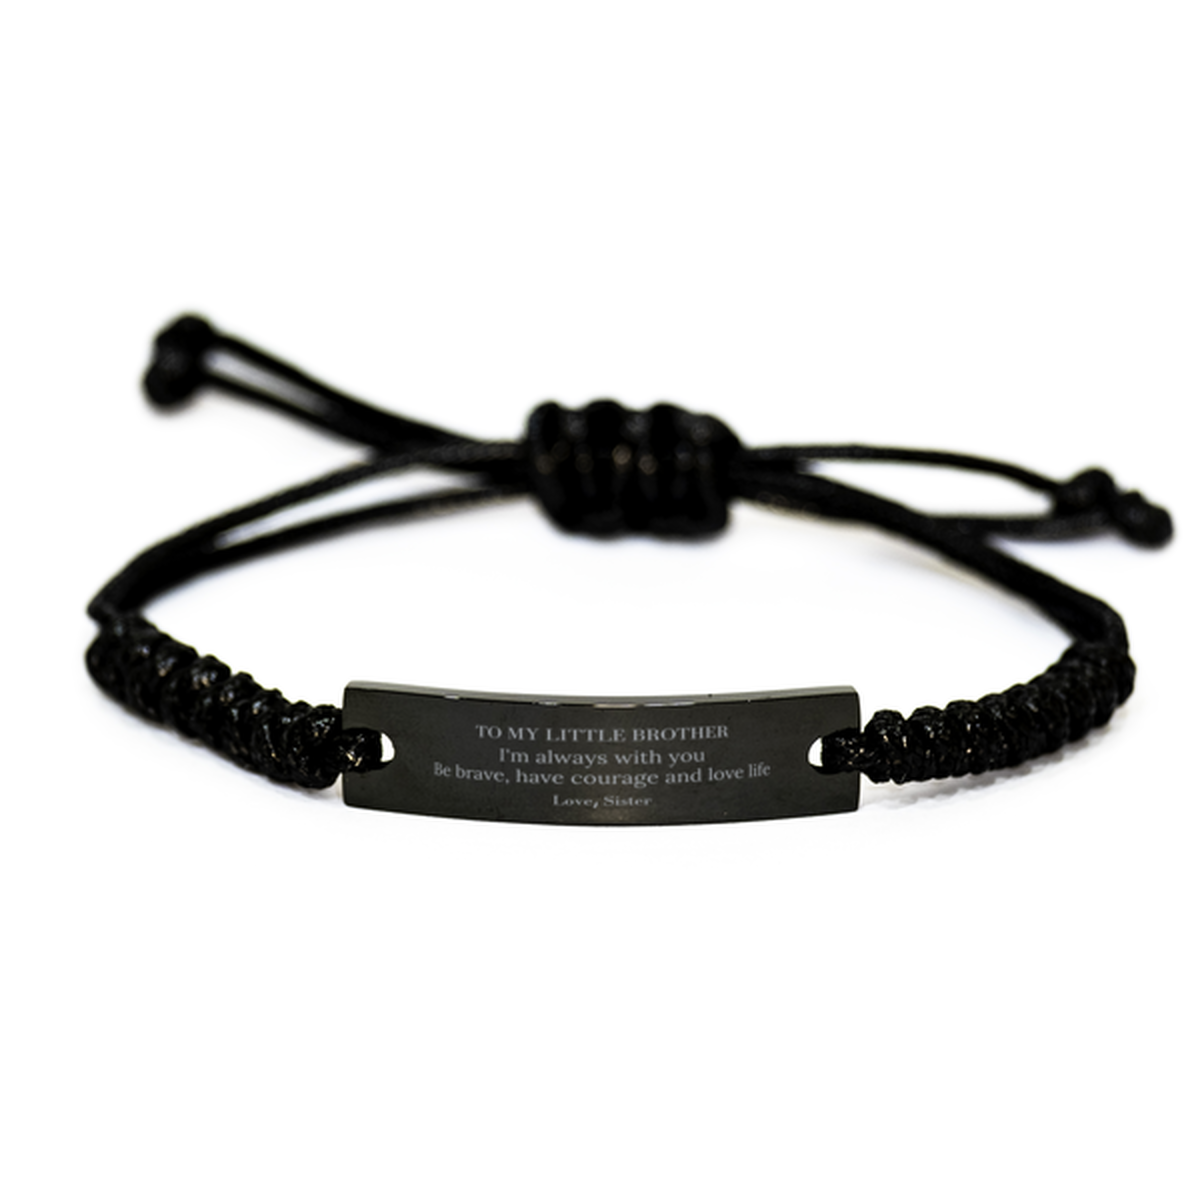 To My Little Brother Gifts from Sister, Unique Black Rope Bracelet Inspirational Christmas Birthday Graduation Gifts for Little Brother I'm always with you. Be brave, have courage and love life. Love, Sister